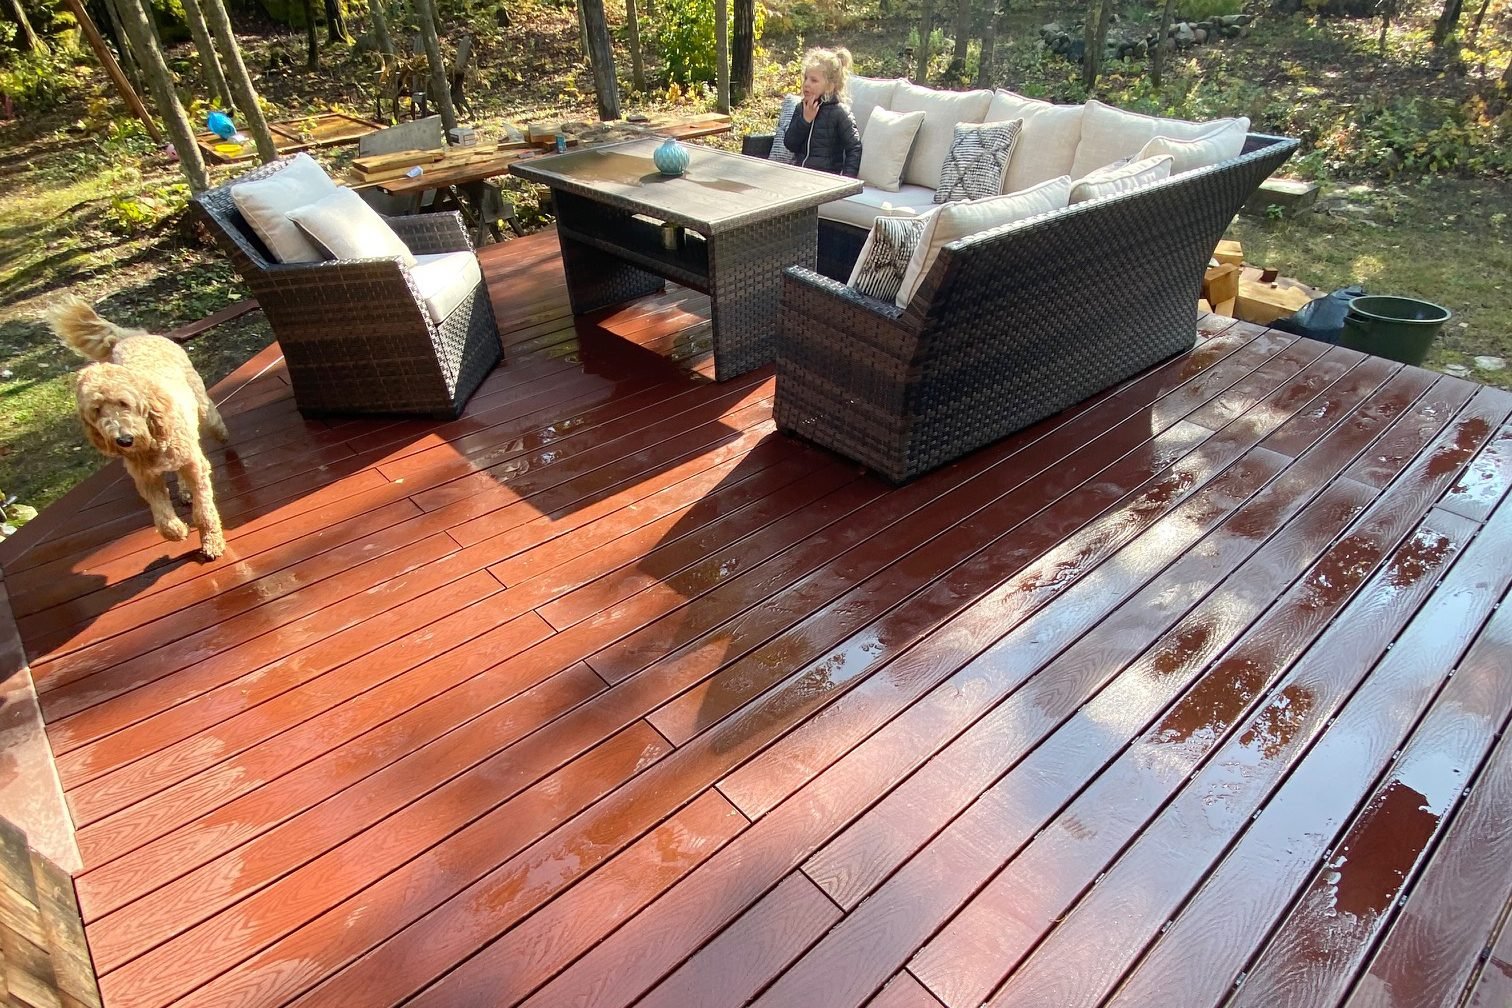 8 Tips for Building a Deck That Will Last for Decades